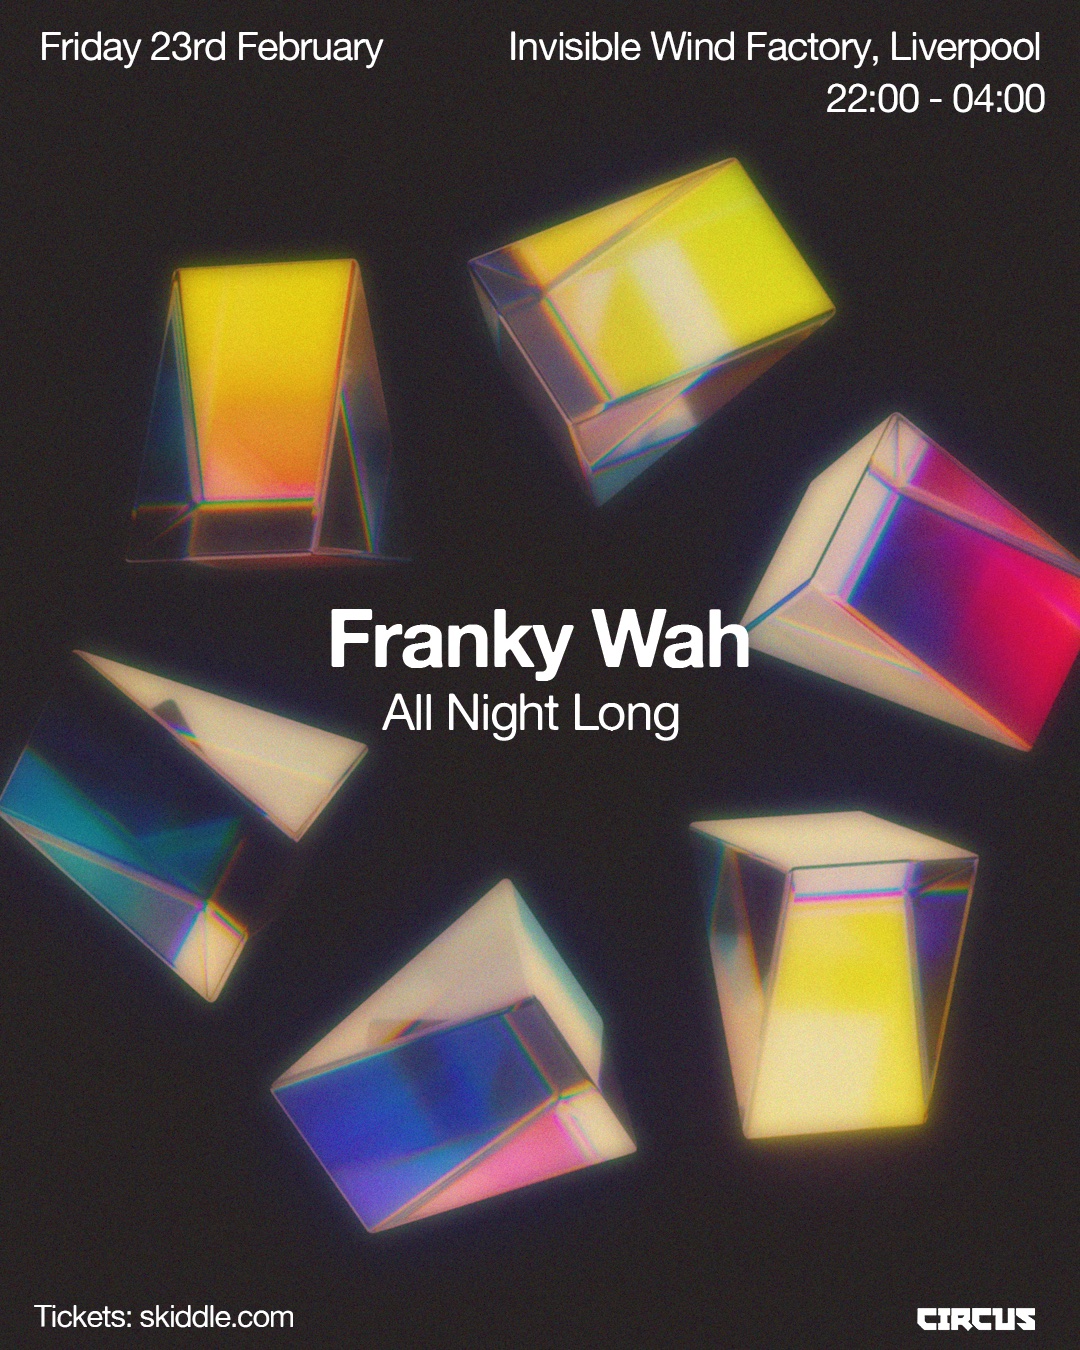 Franky Wah “All Night Long” – Fri 23rd Feb – Invisible Wind Factory, Liverpool